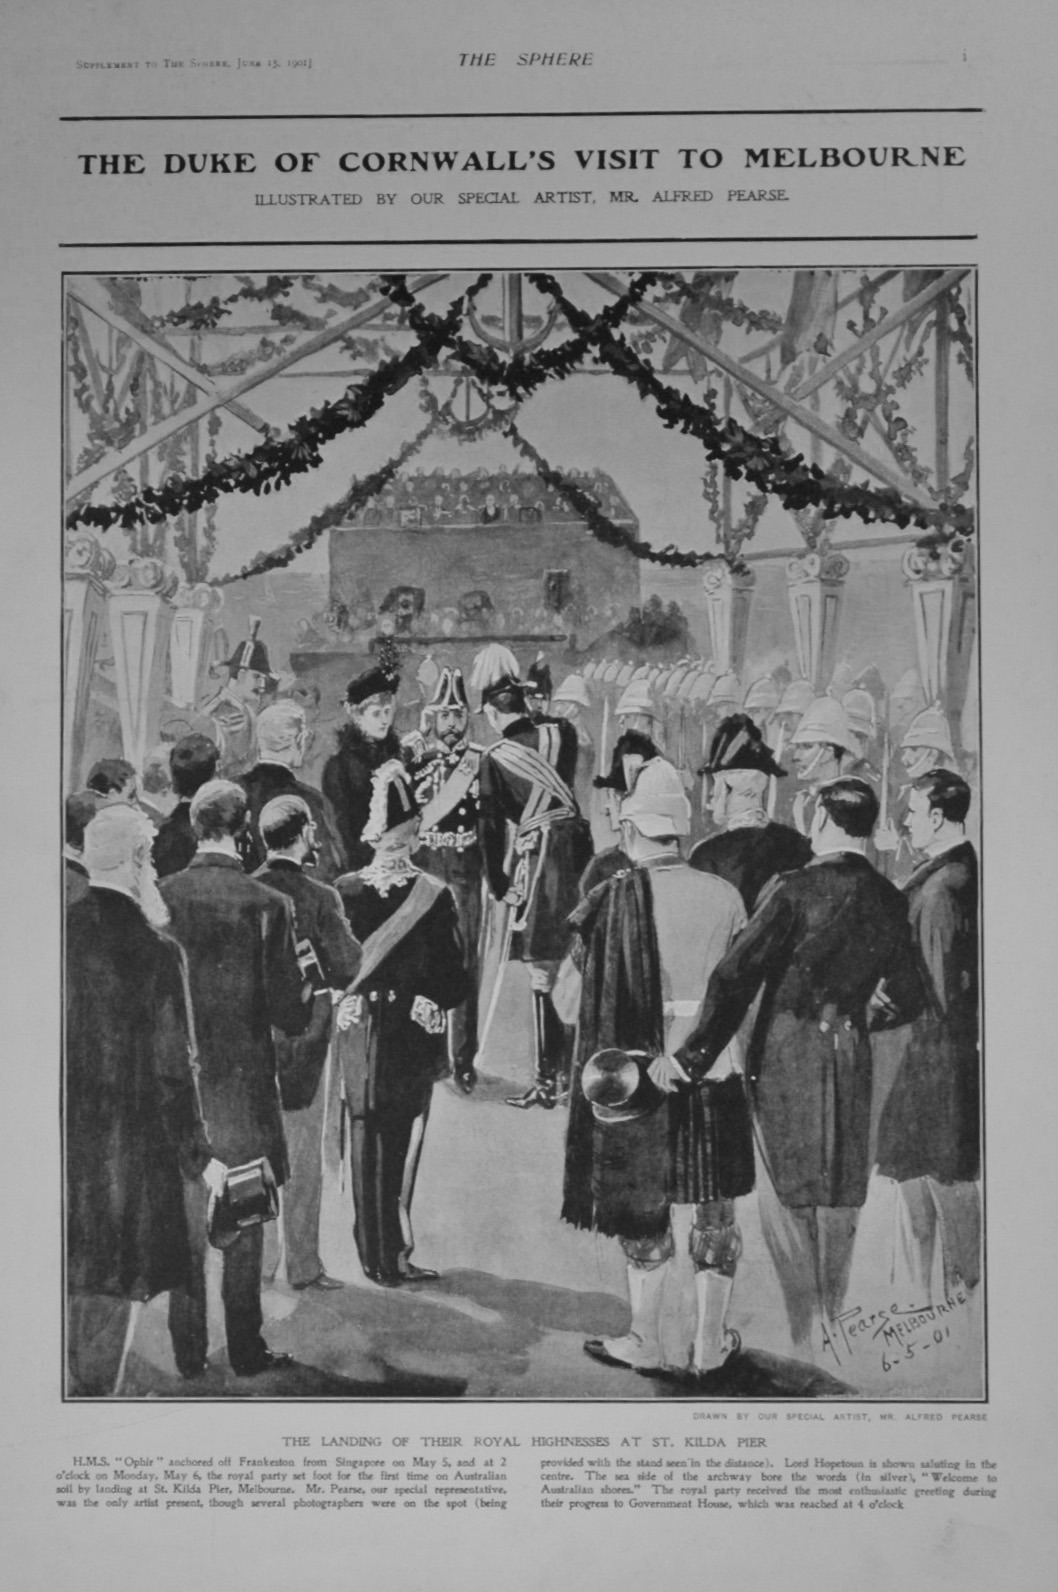 The Duke of Cornwall's visit to Melbourne - 1901